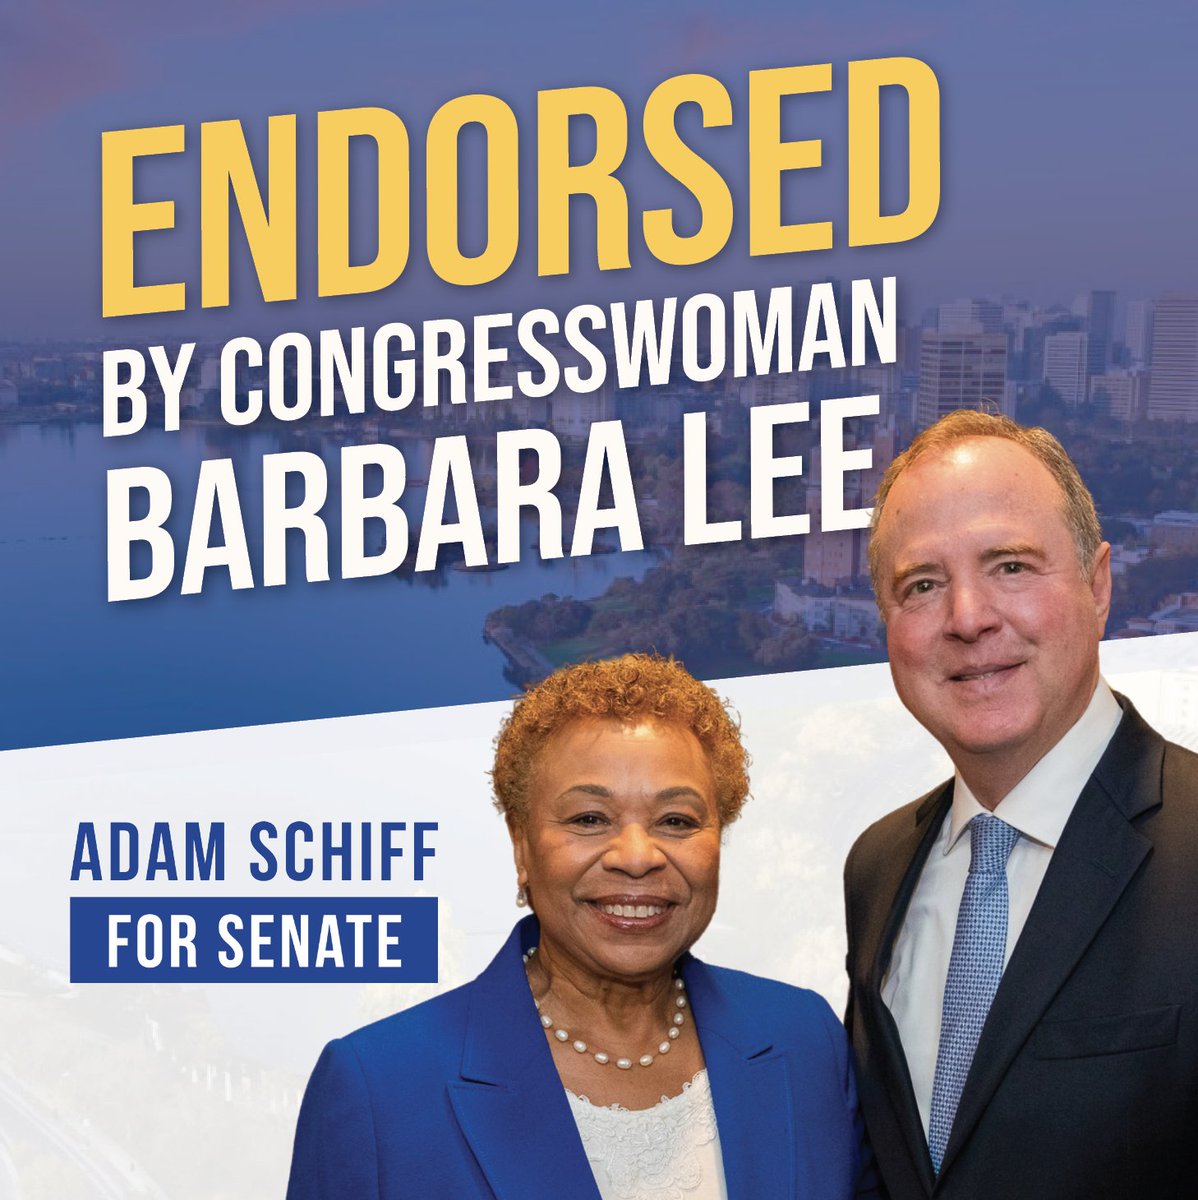 Congresswoman @BarbaraLeeForCA is one of the nation's most powerful advocates for social justice, housing and economic opportunity. She's a tireless fighter for working families – and I look forward to continuing to work with her to improve the quality of life for every